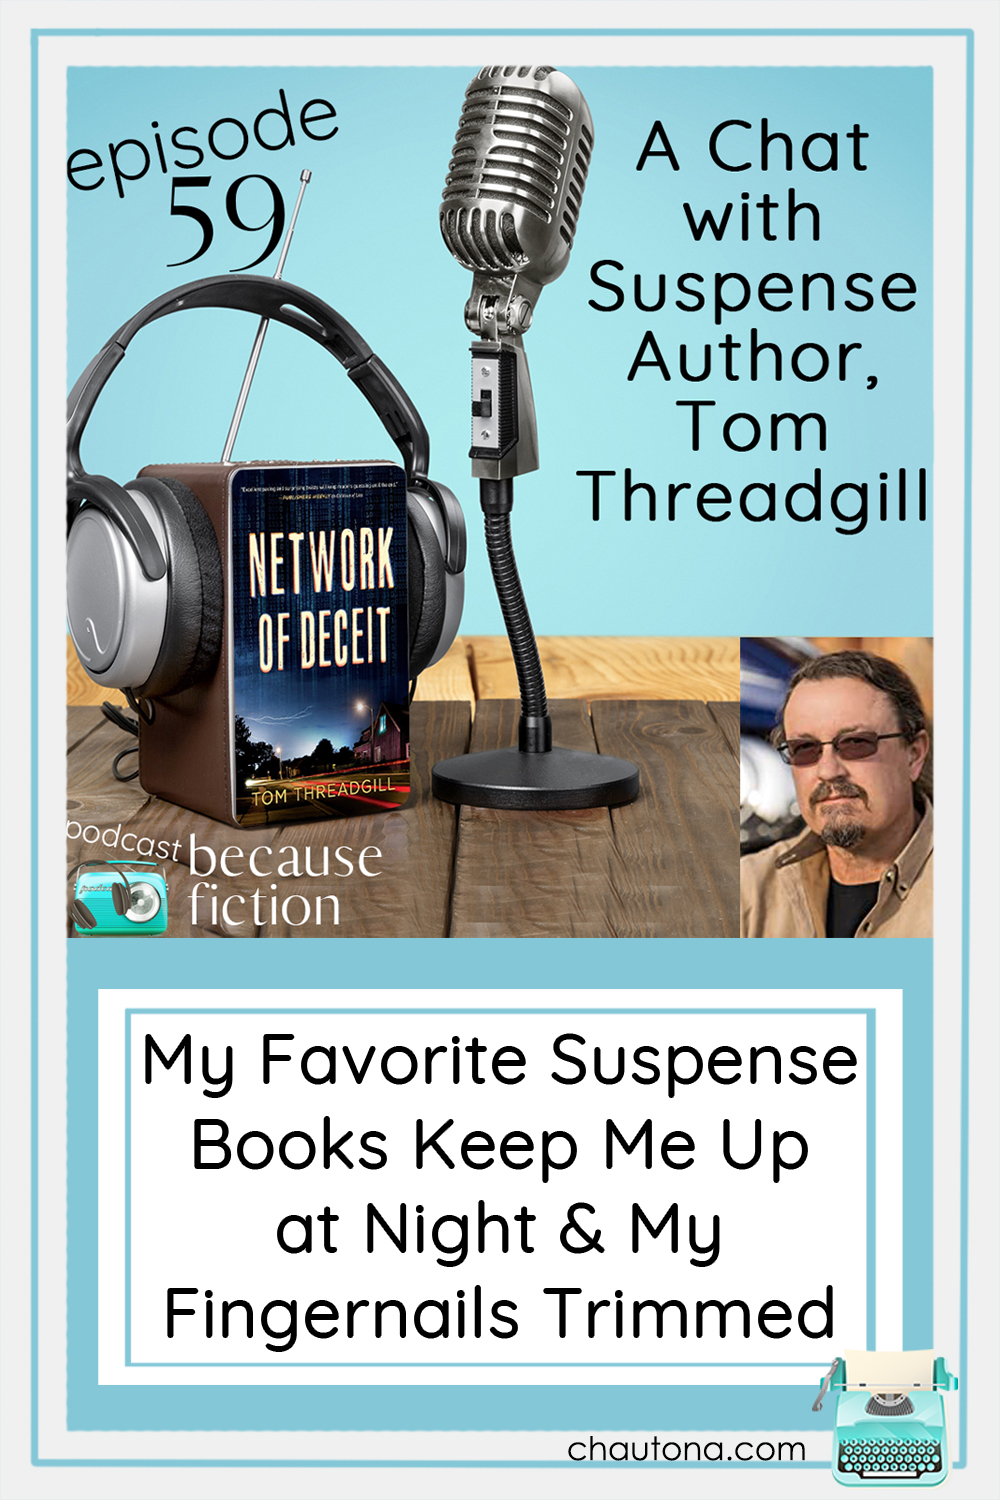 In this episode, I chat with Christian author, Tom Threadgill about his Amara series (especially Network of Deceit) and about his Jeremy Winters series. via @chautonahavig